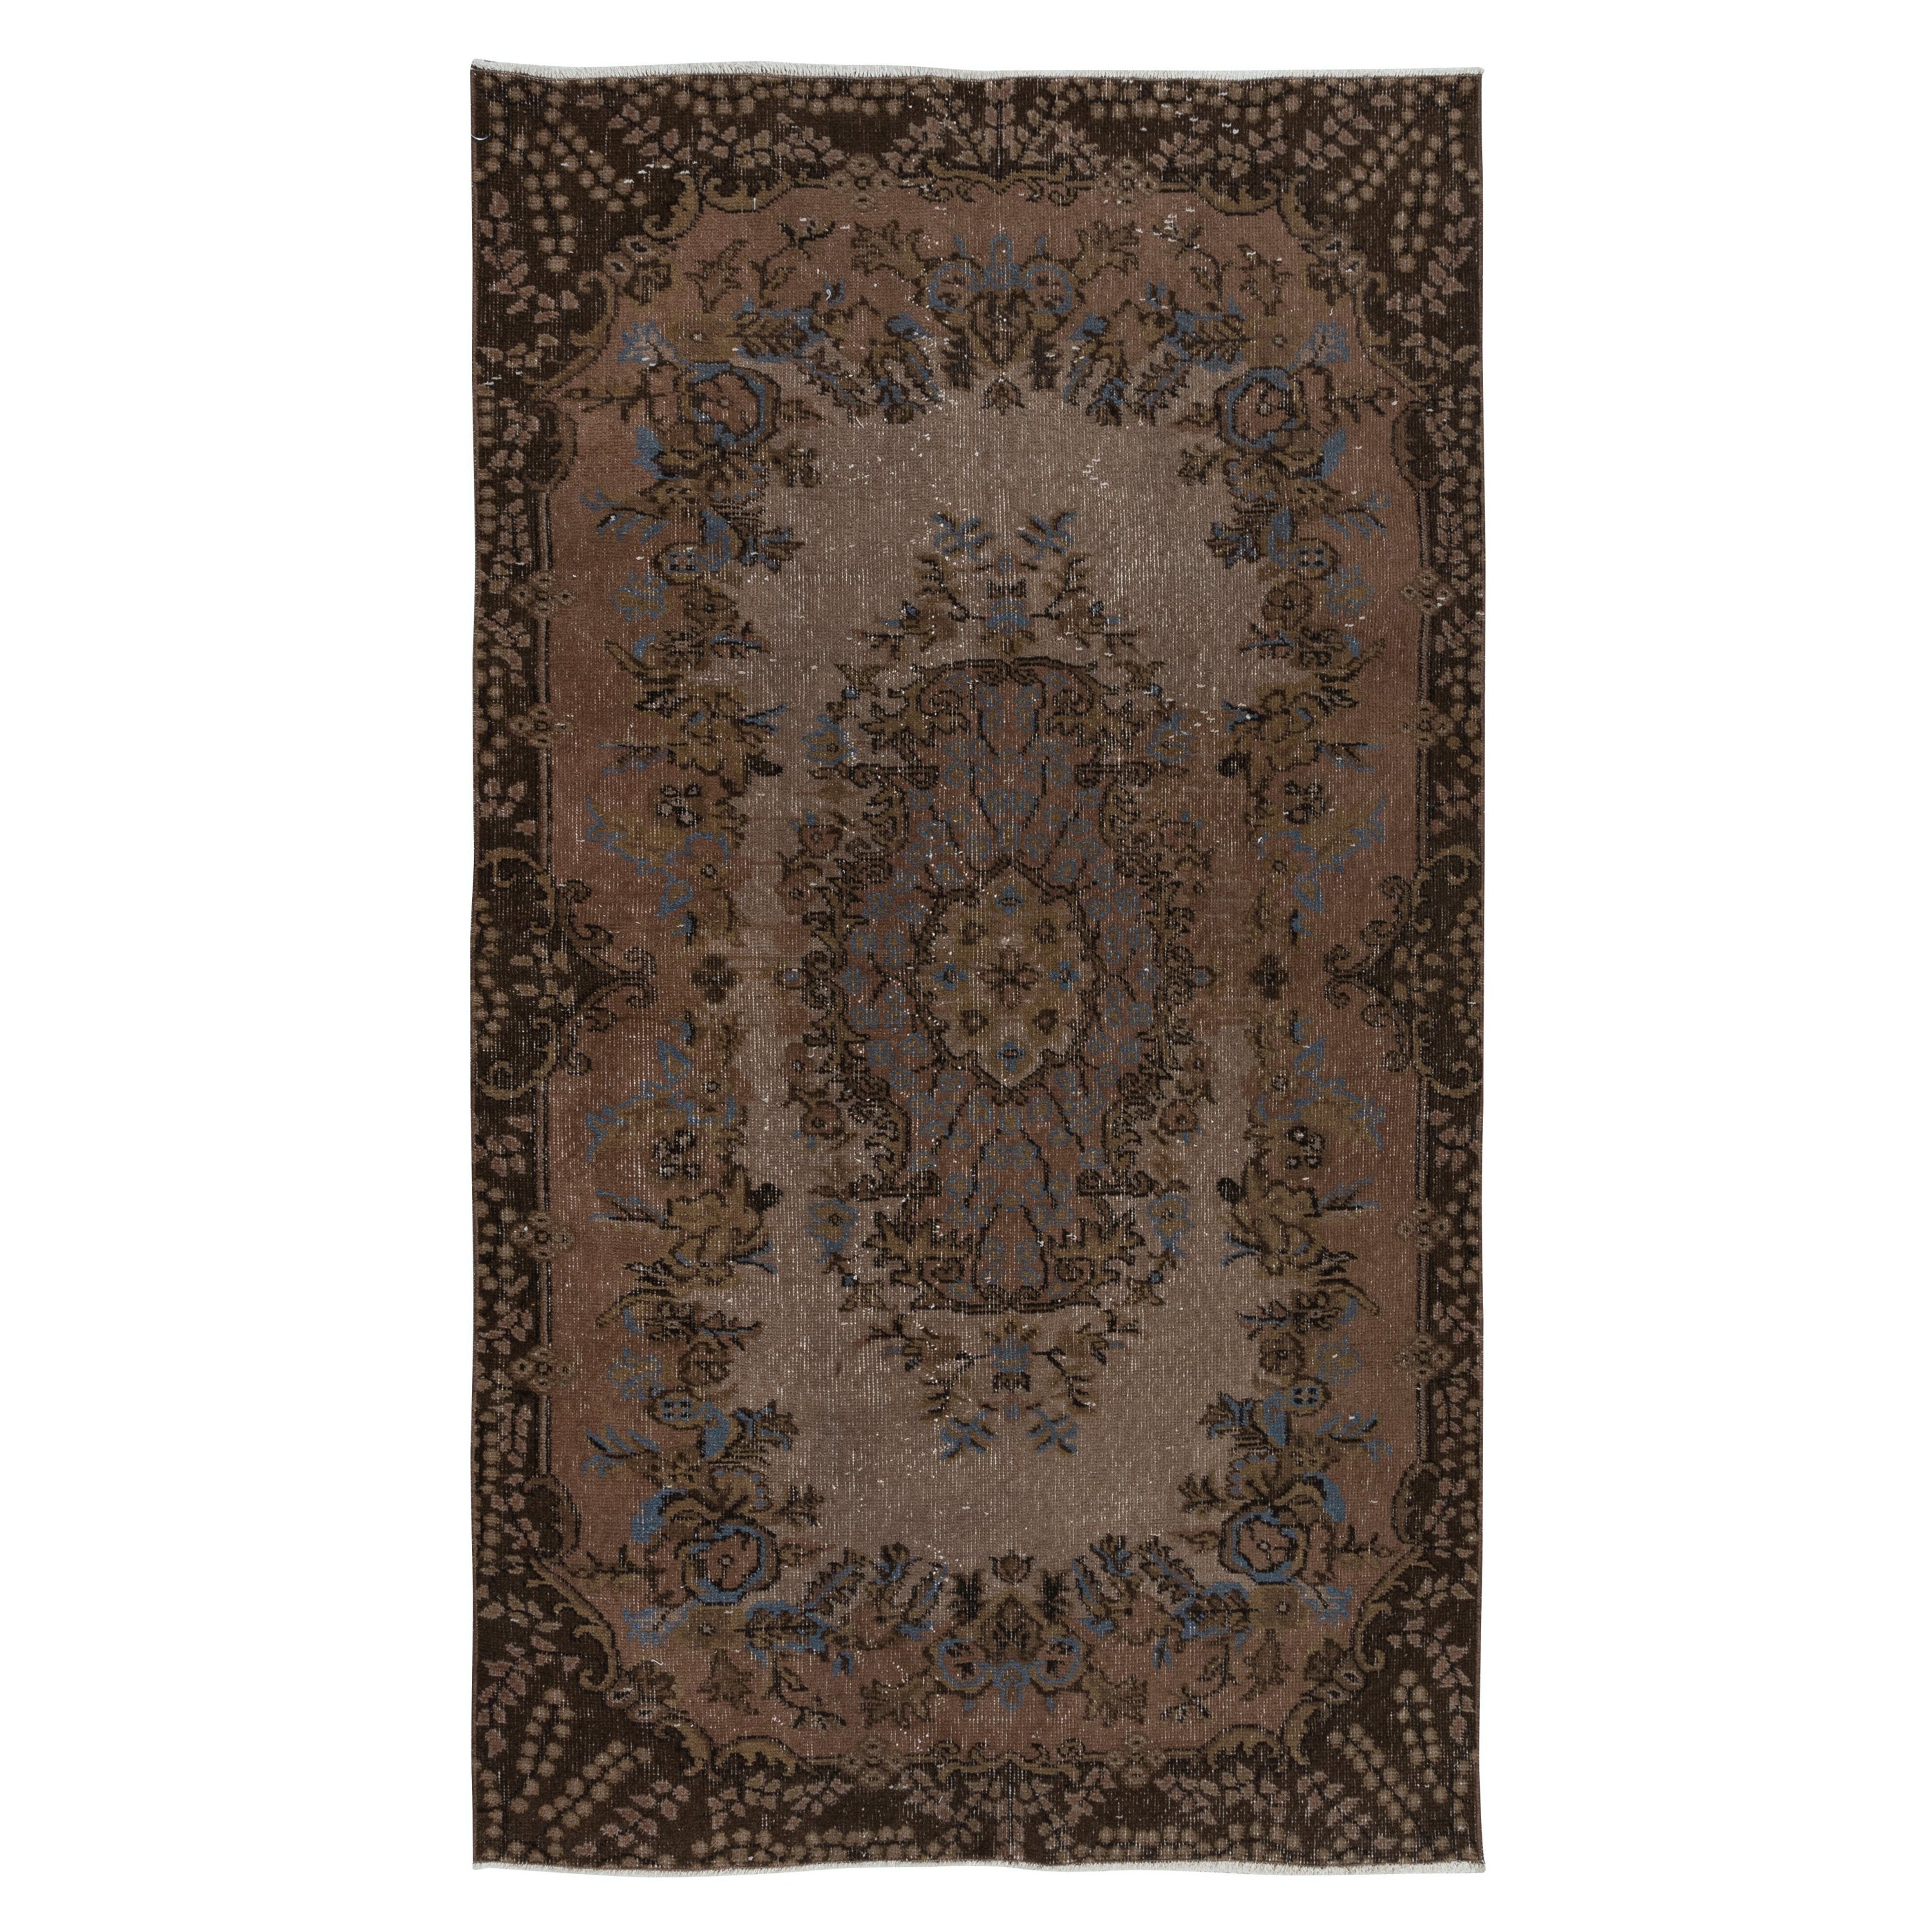 4x6.7 Ft Small Modern Brown Rug with Medallion Design, Handknotted in Turkey